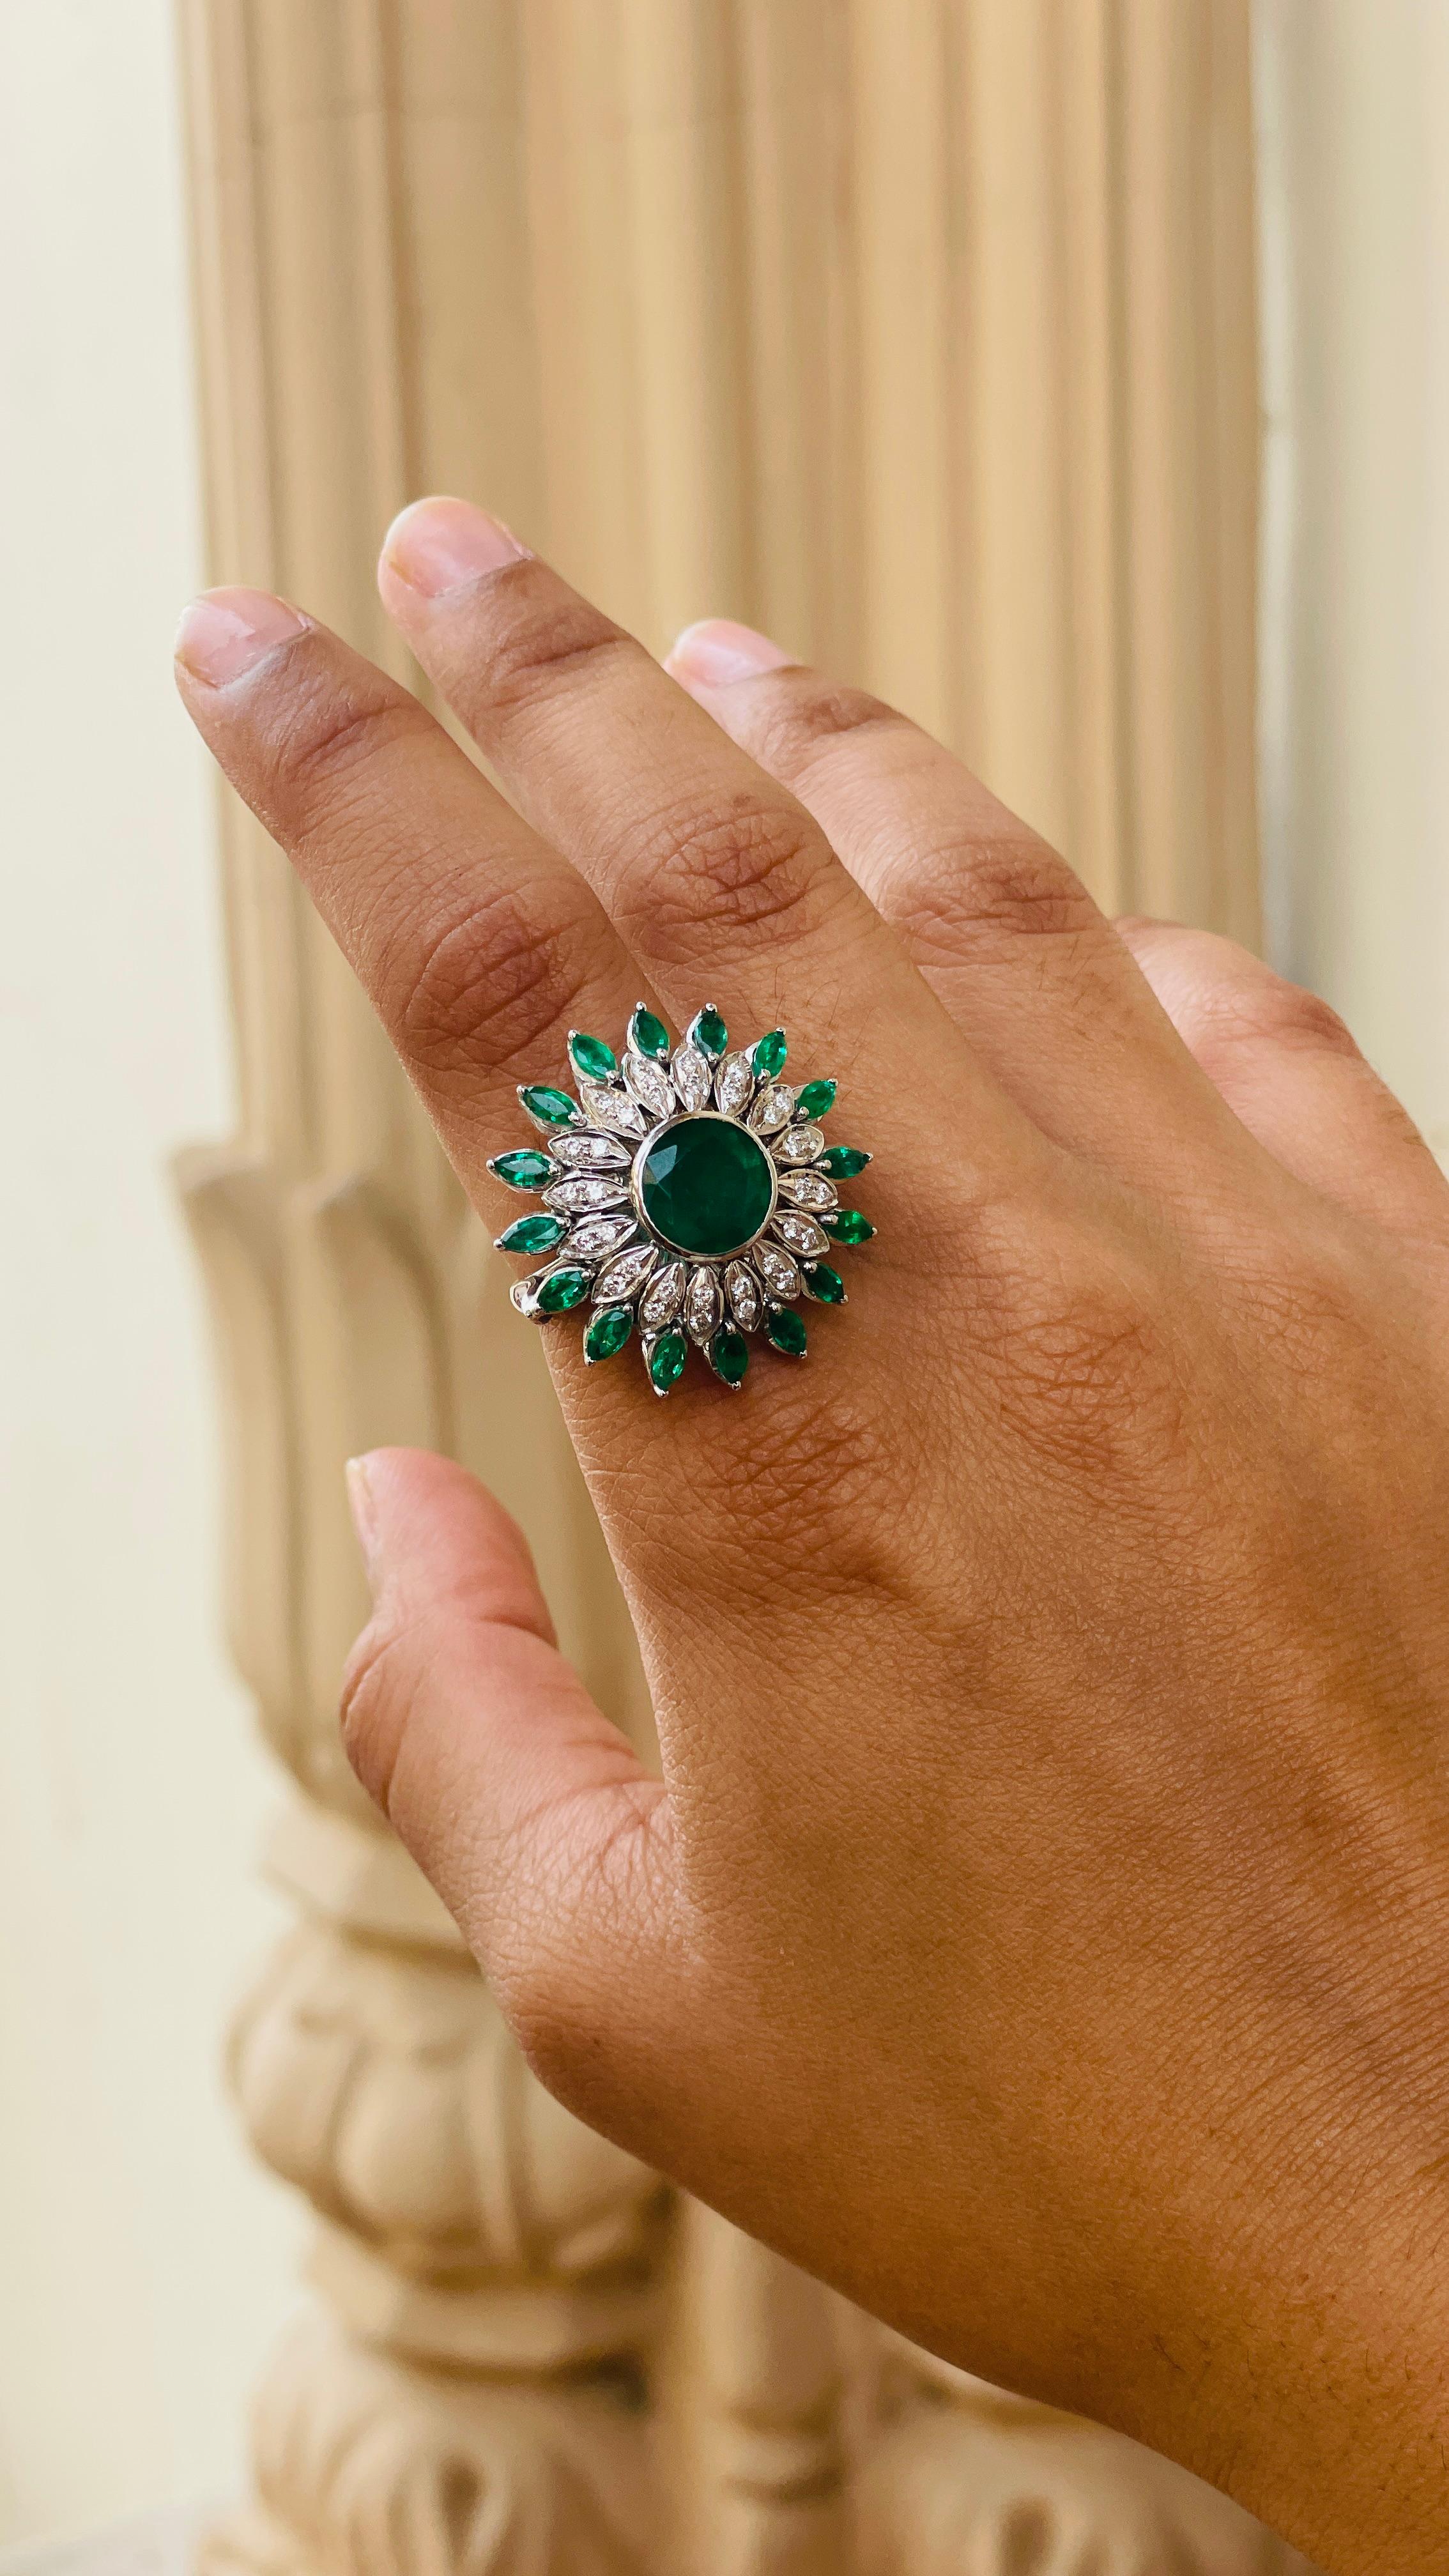 For Sale:  Statement Emerald Ring in 18K White Gold with Diamonds 12